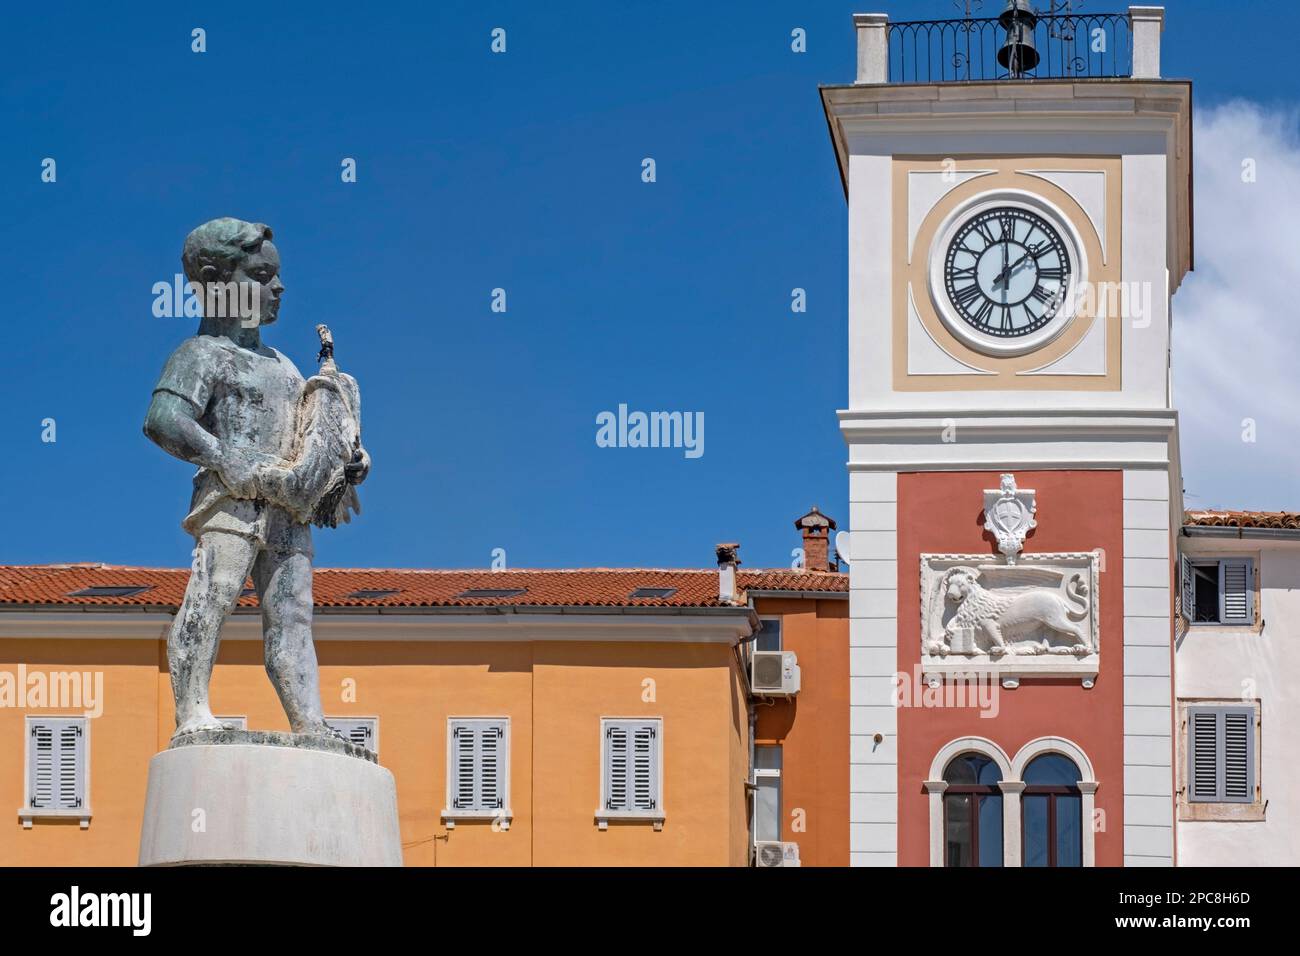 Boy with Fish fountain and 17th century red clock tower in the city Rovinj / Rovigno, seaside resort along the Adriatic Sea, Istria County, Croatia Stock Photo